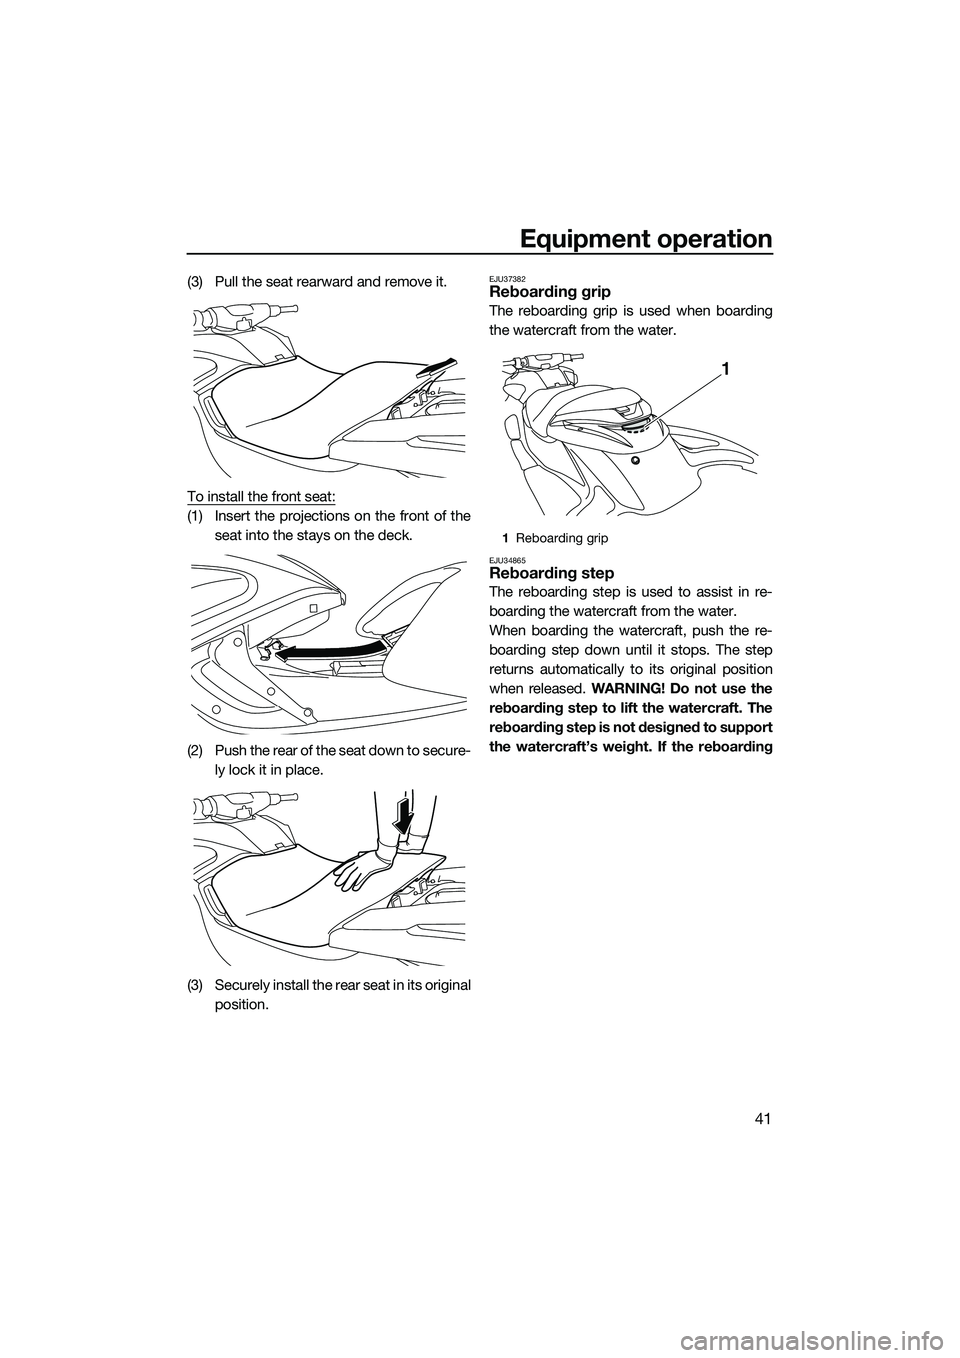 YAMAHA FZR SVHO 2015  Owners Manual Equipment operation
41
(3) Pull the seat rearward and remove it.
To install the front seat:
(1) Insert the projections on the front of theseat into the stays on the deck.
(2) Push the rear of the seat